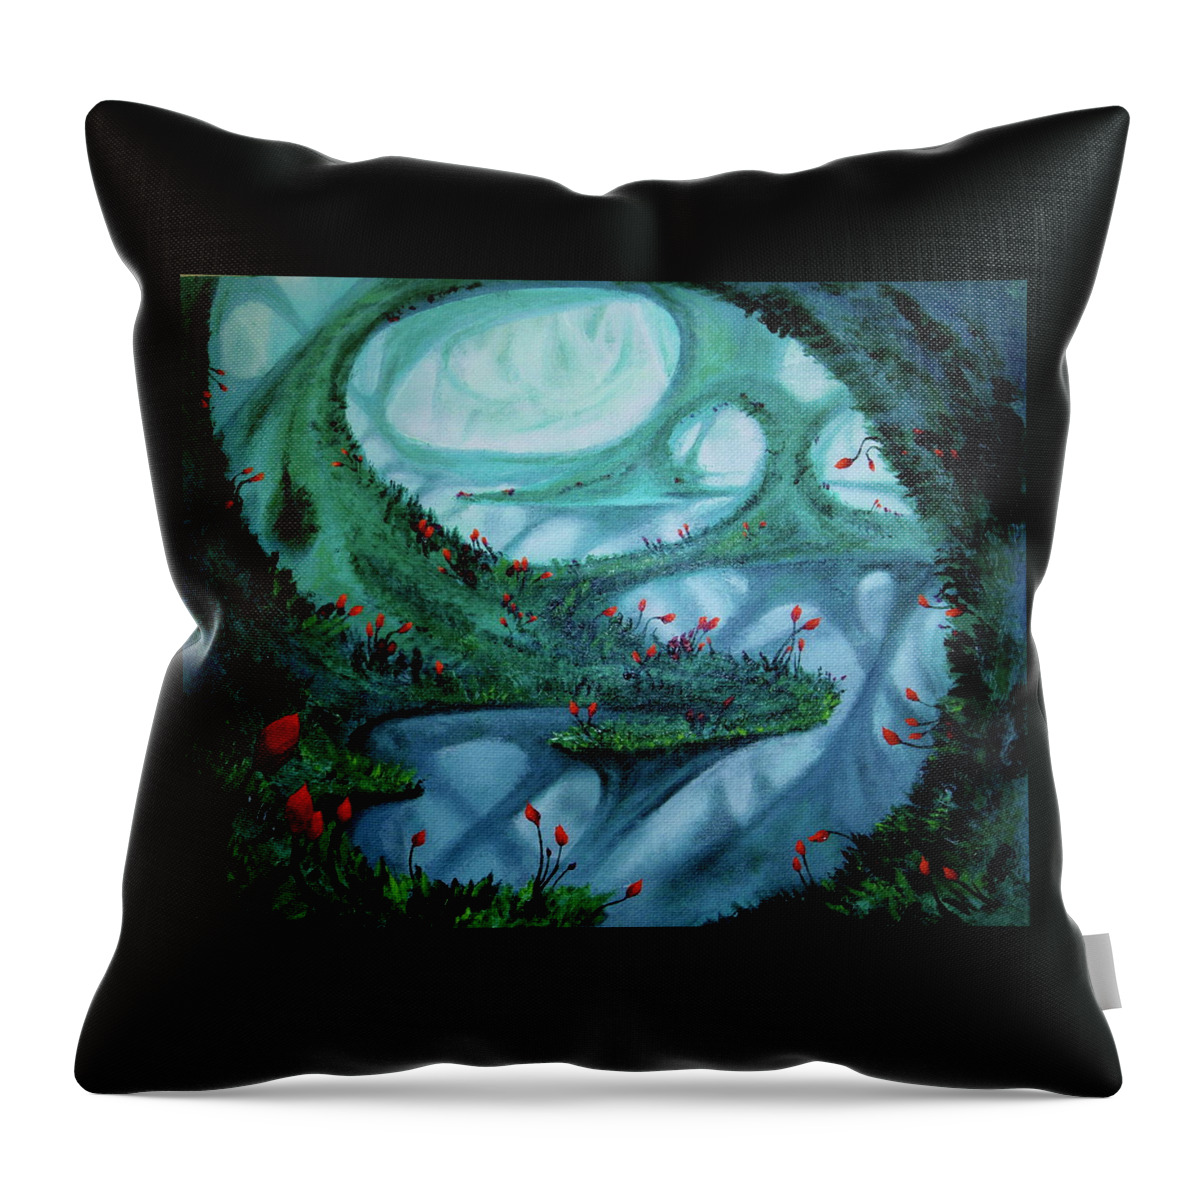 Abstract Throw Pillow featuring the painting Tunnel of Dreams by Leizel Grant